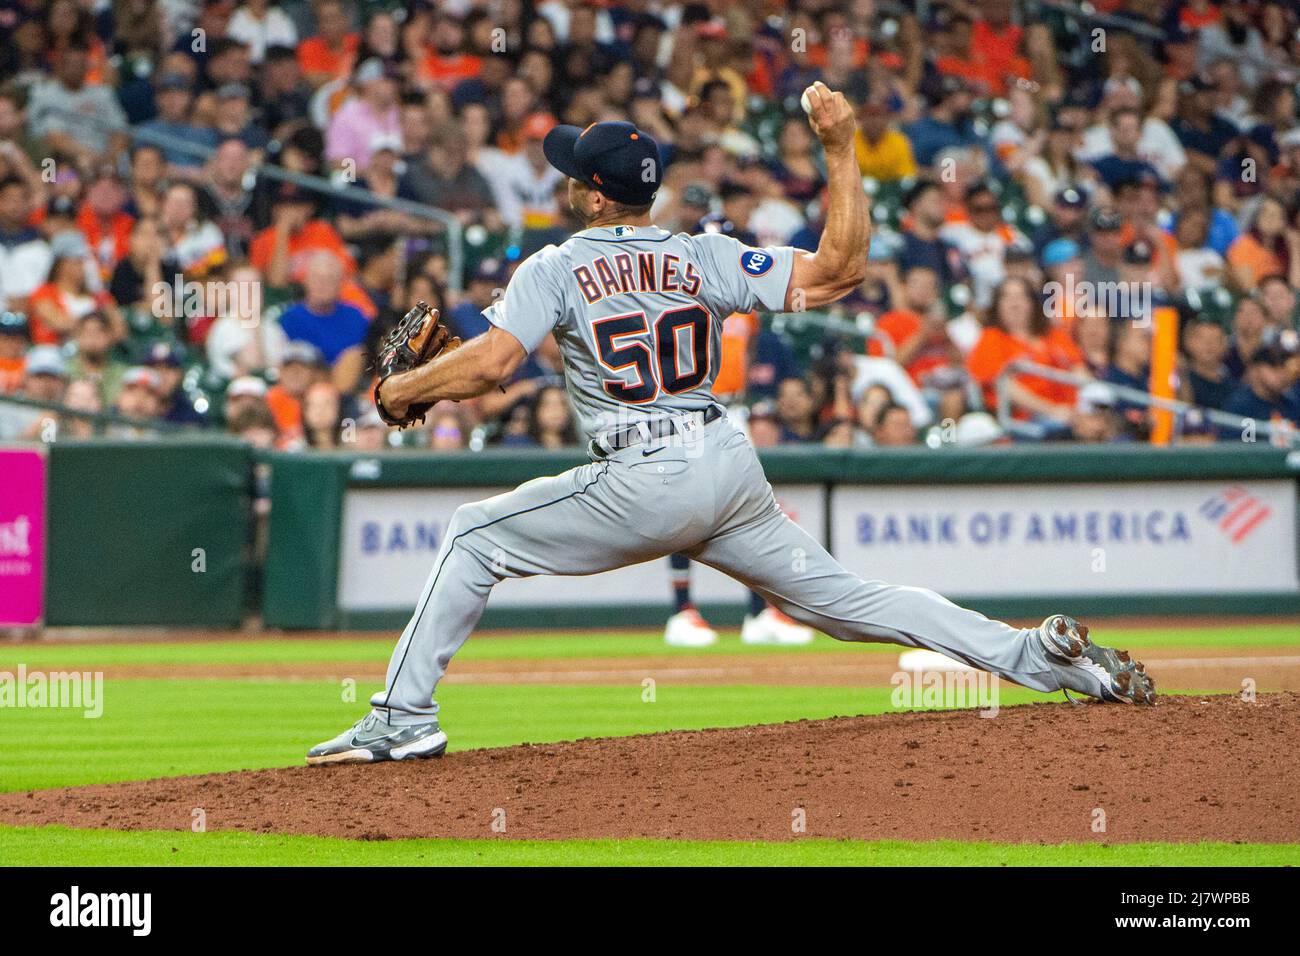 Detroit Tigers starting pitcher Alex Lange (55) pitches in the bottom of the sixth inning during the MLB game between the Houston Astros and the Detro Stock Photo